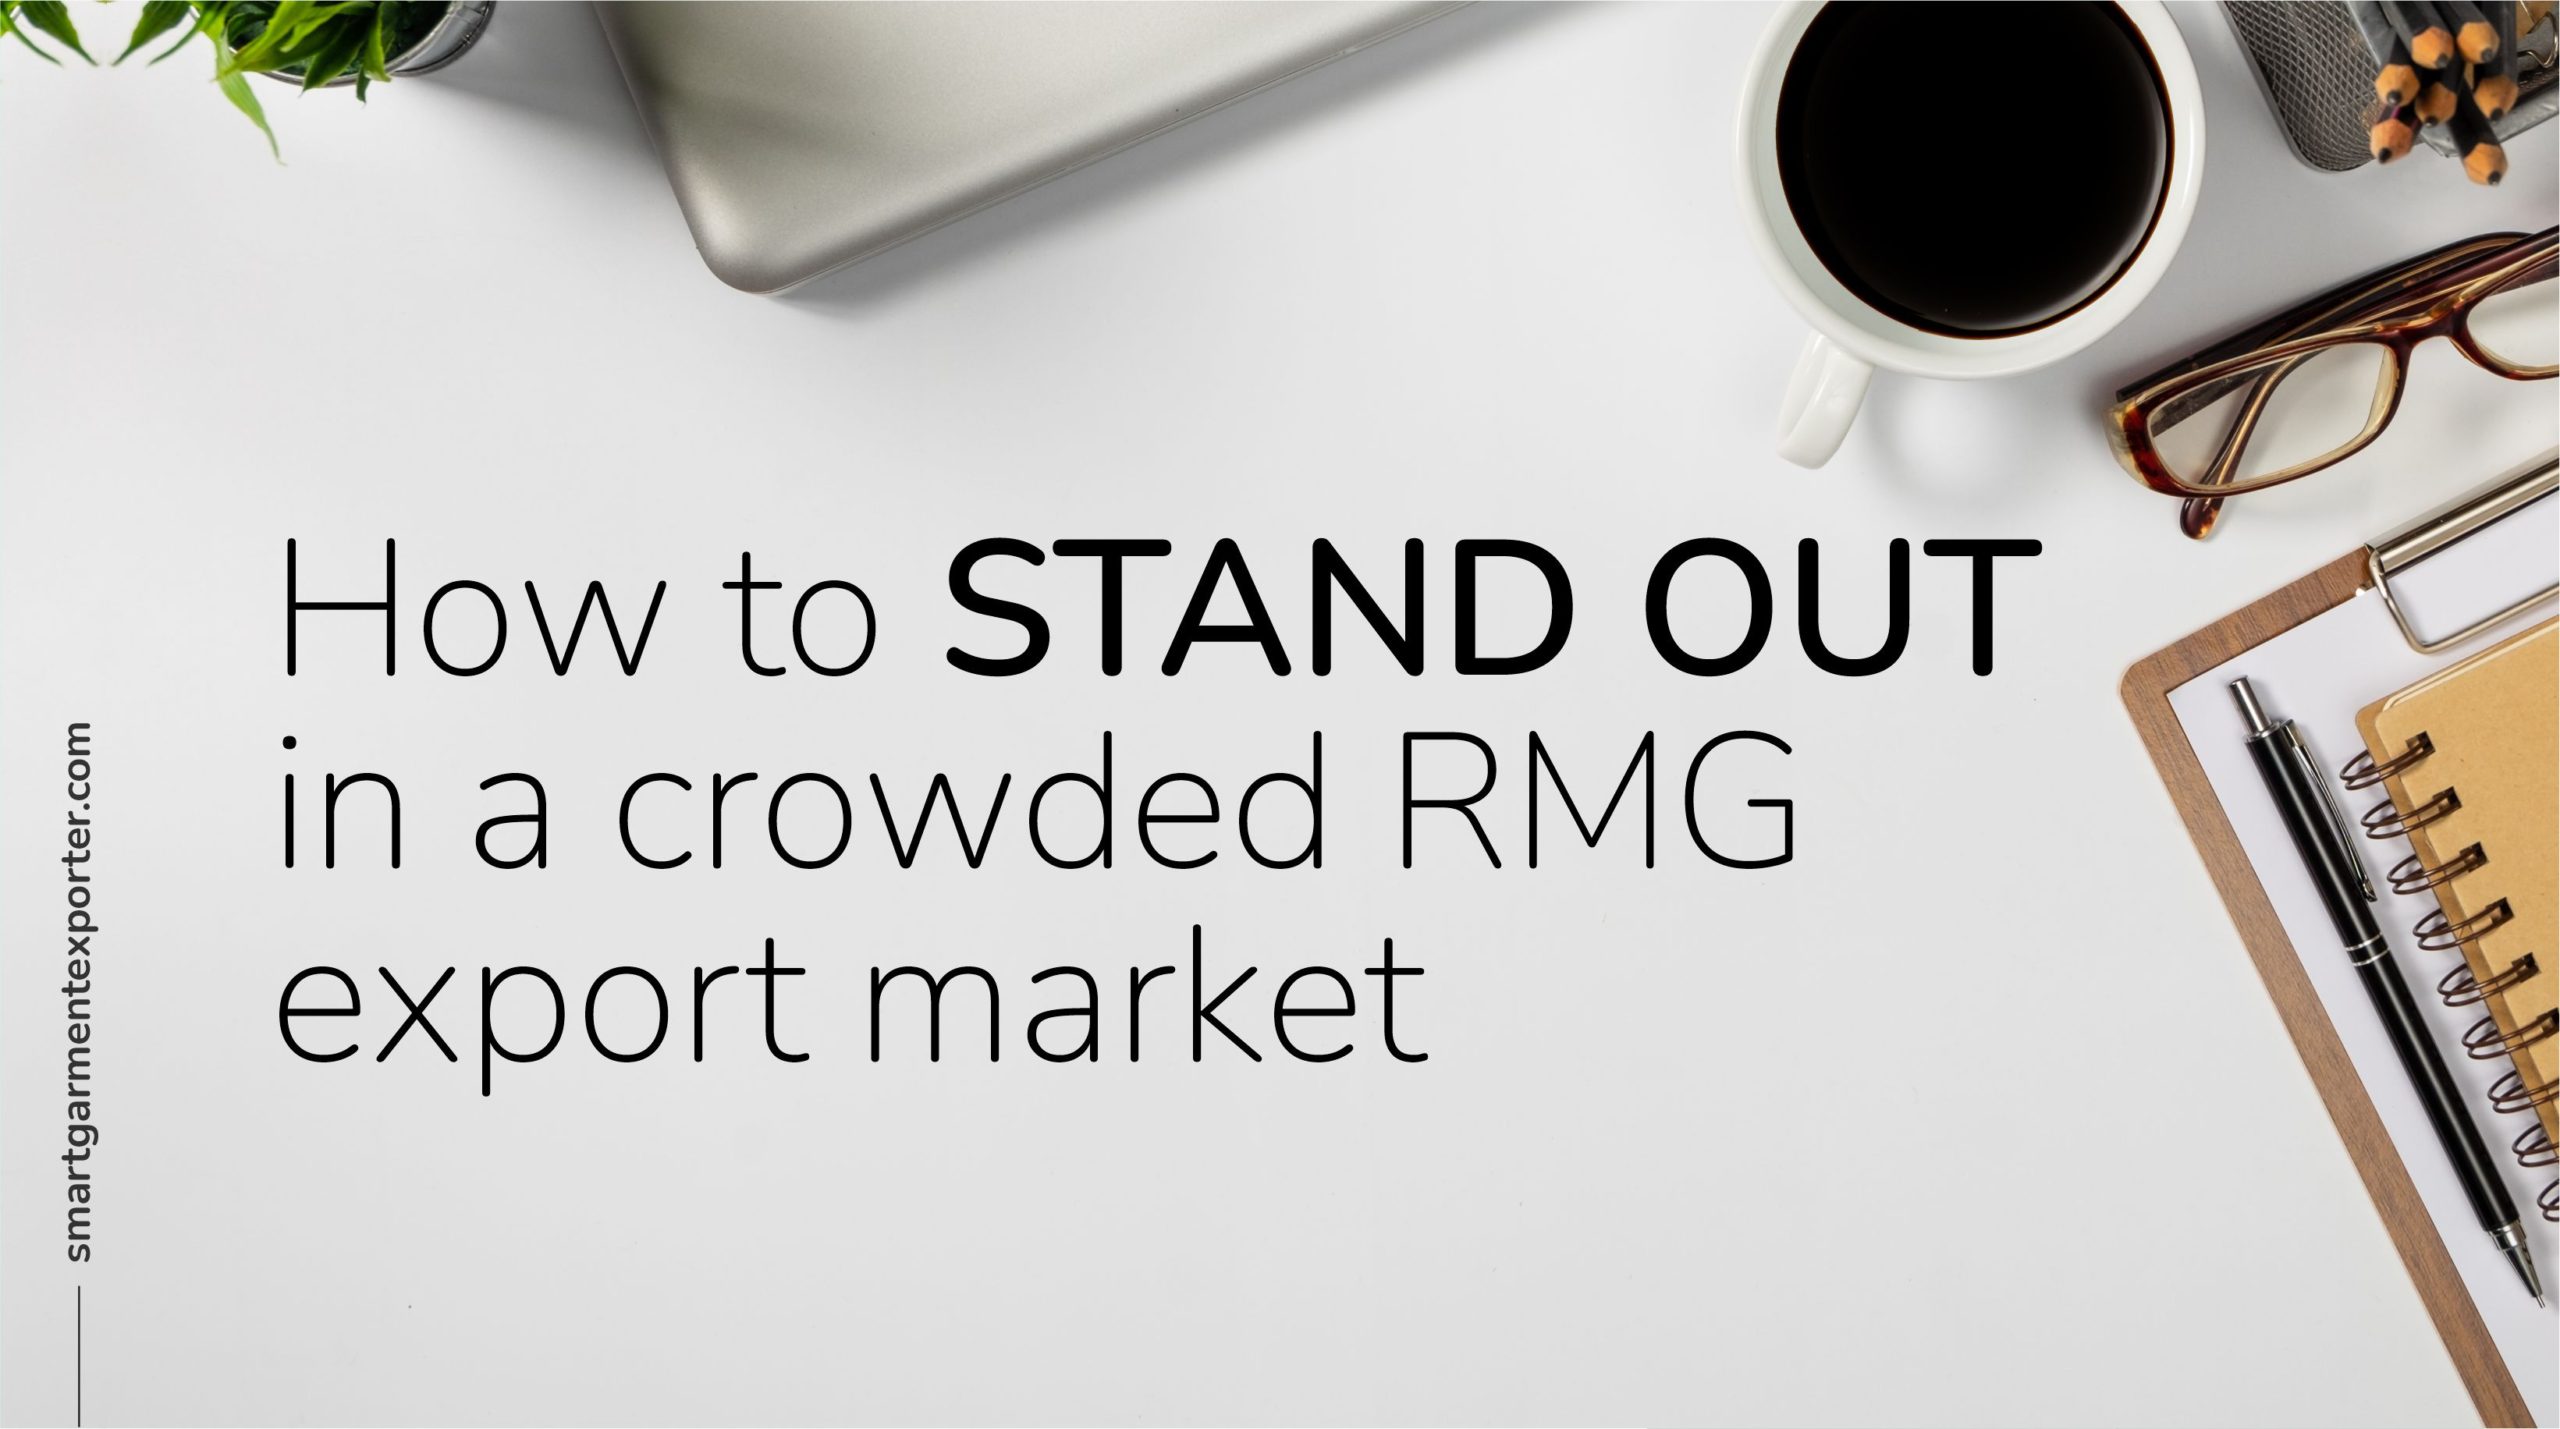 How to stand out in a crowded garment export market? (HINT: Easier than you think)